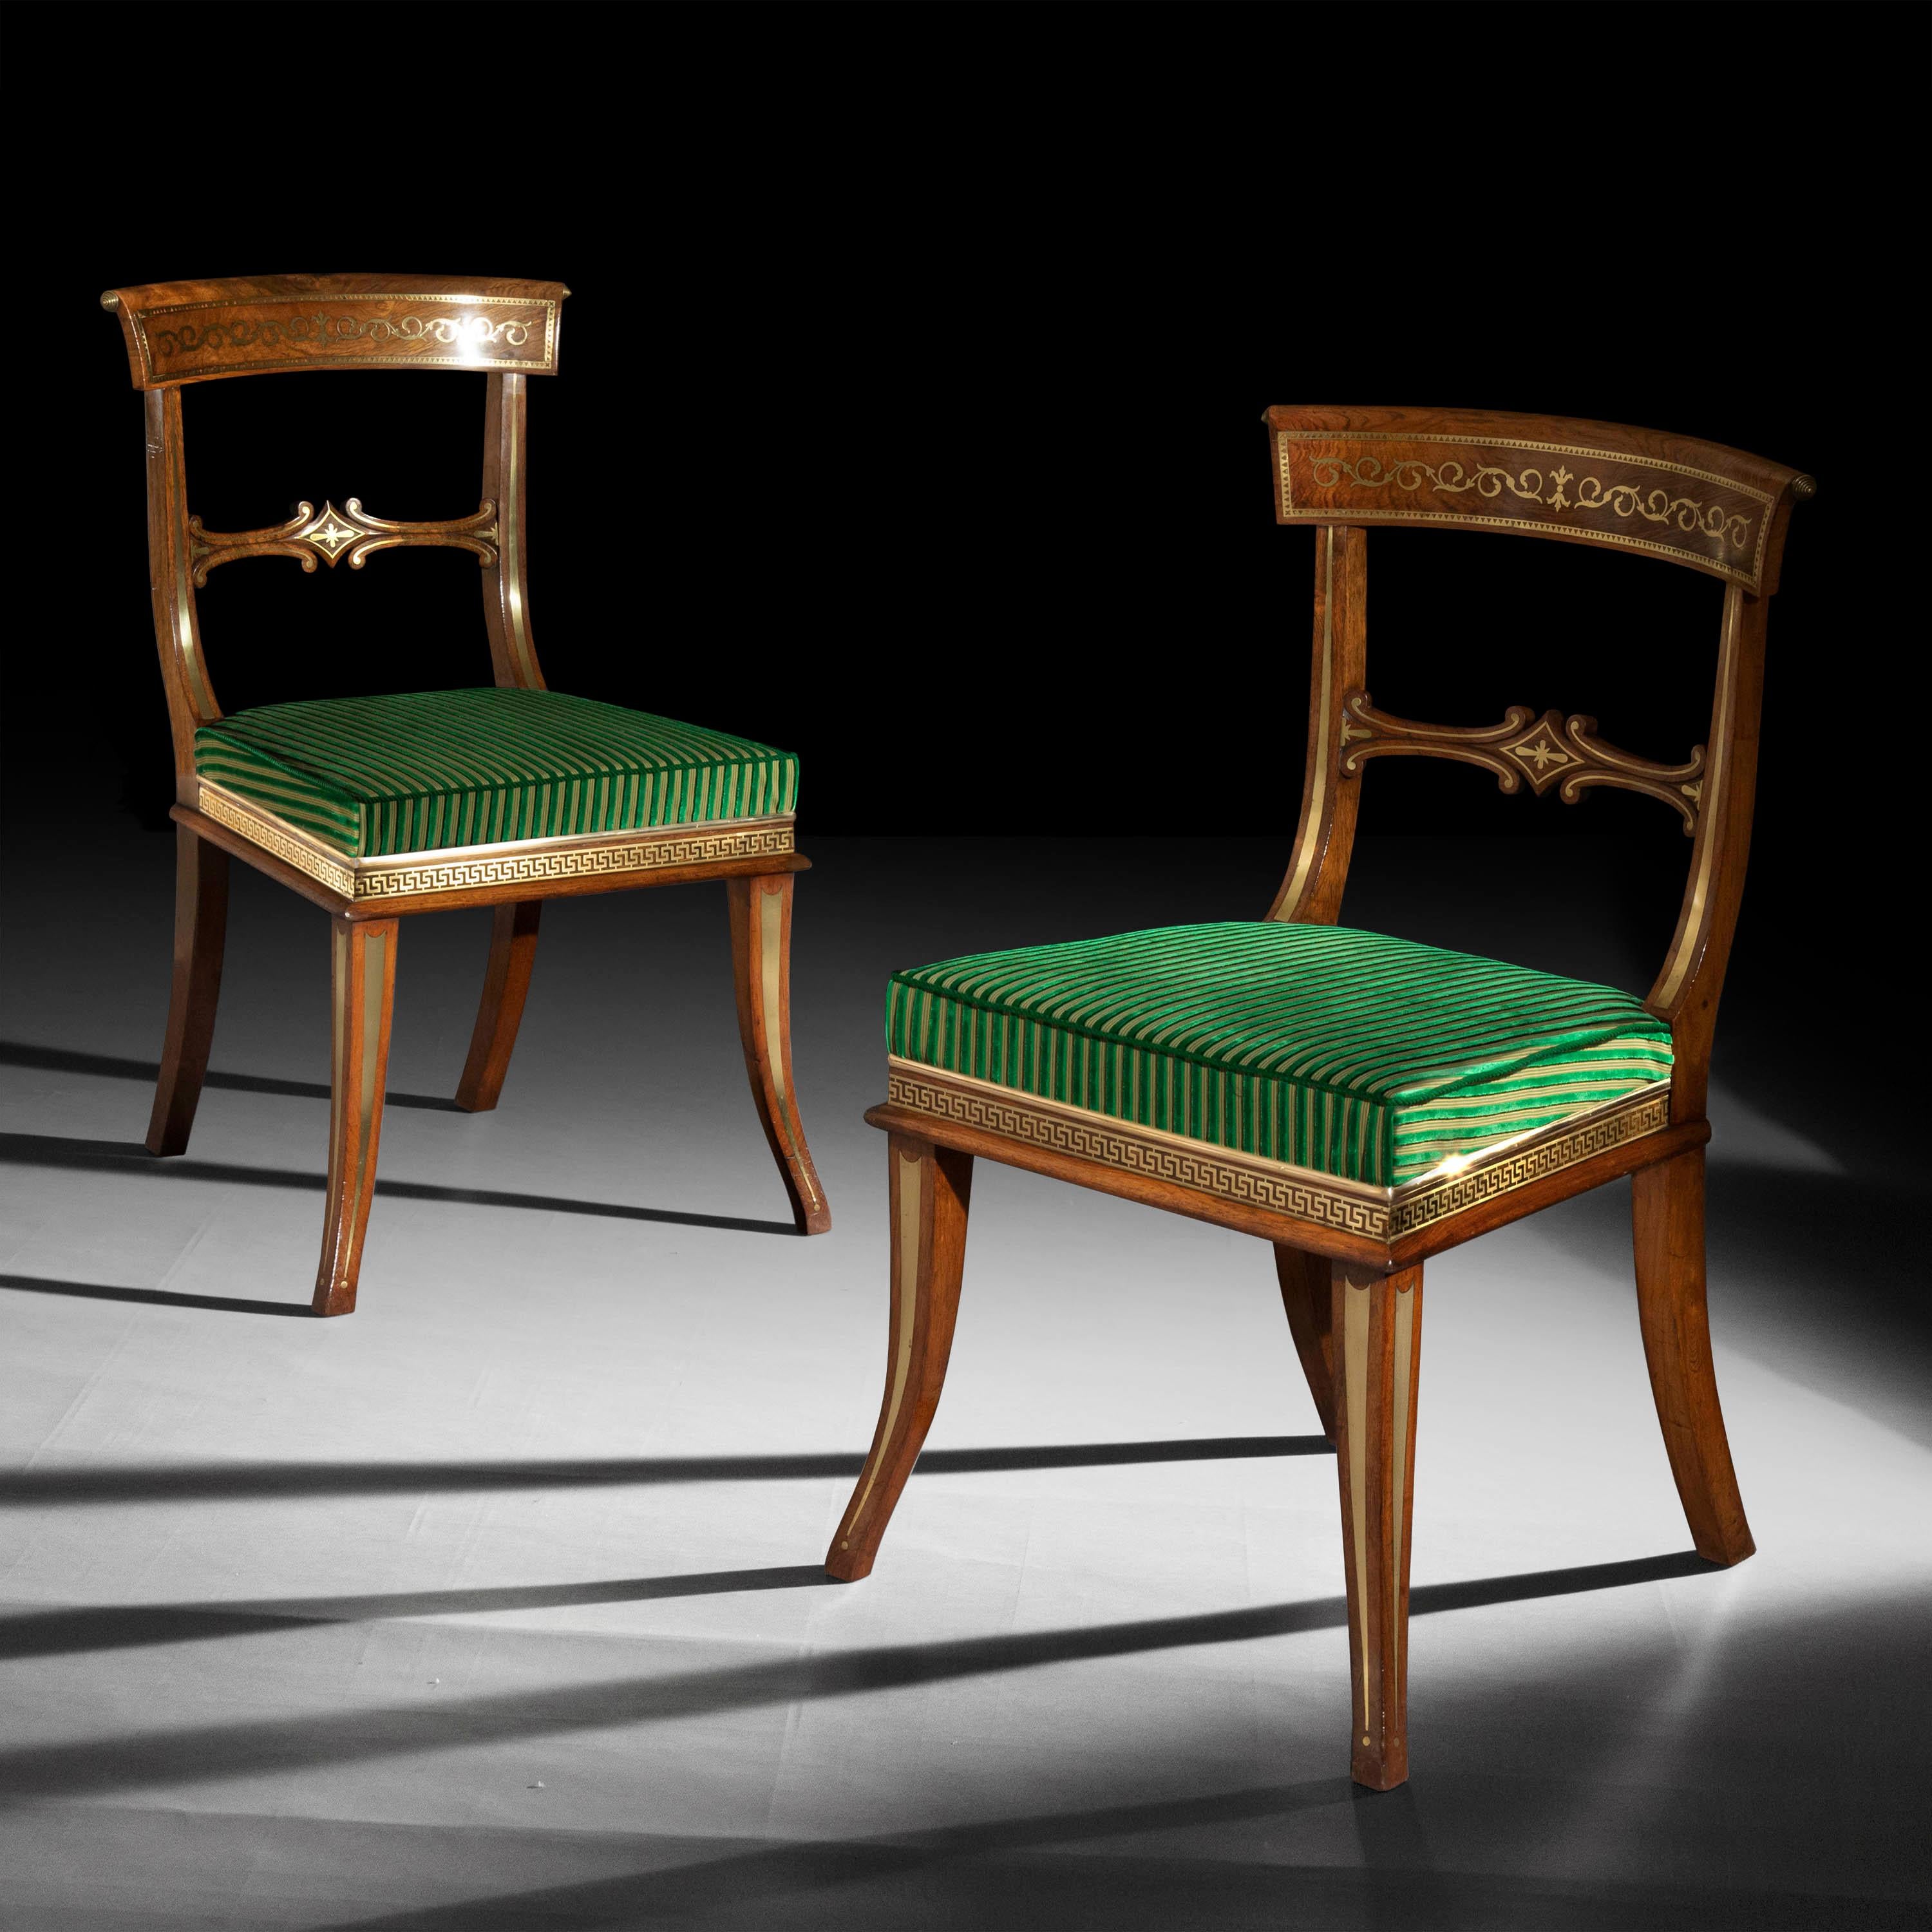 An exceptional pair of Regency period chairs, of well-shaped 'Klismos' outline and rare generous proportions, attributed to George Oakley of Bond Street. London, circa 1810. 

Four pairs available: to purchase a set 8 eight chairs, please, select